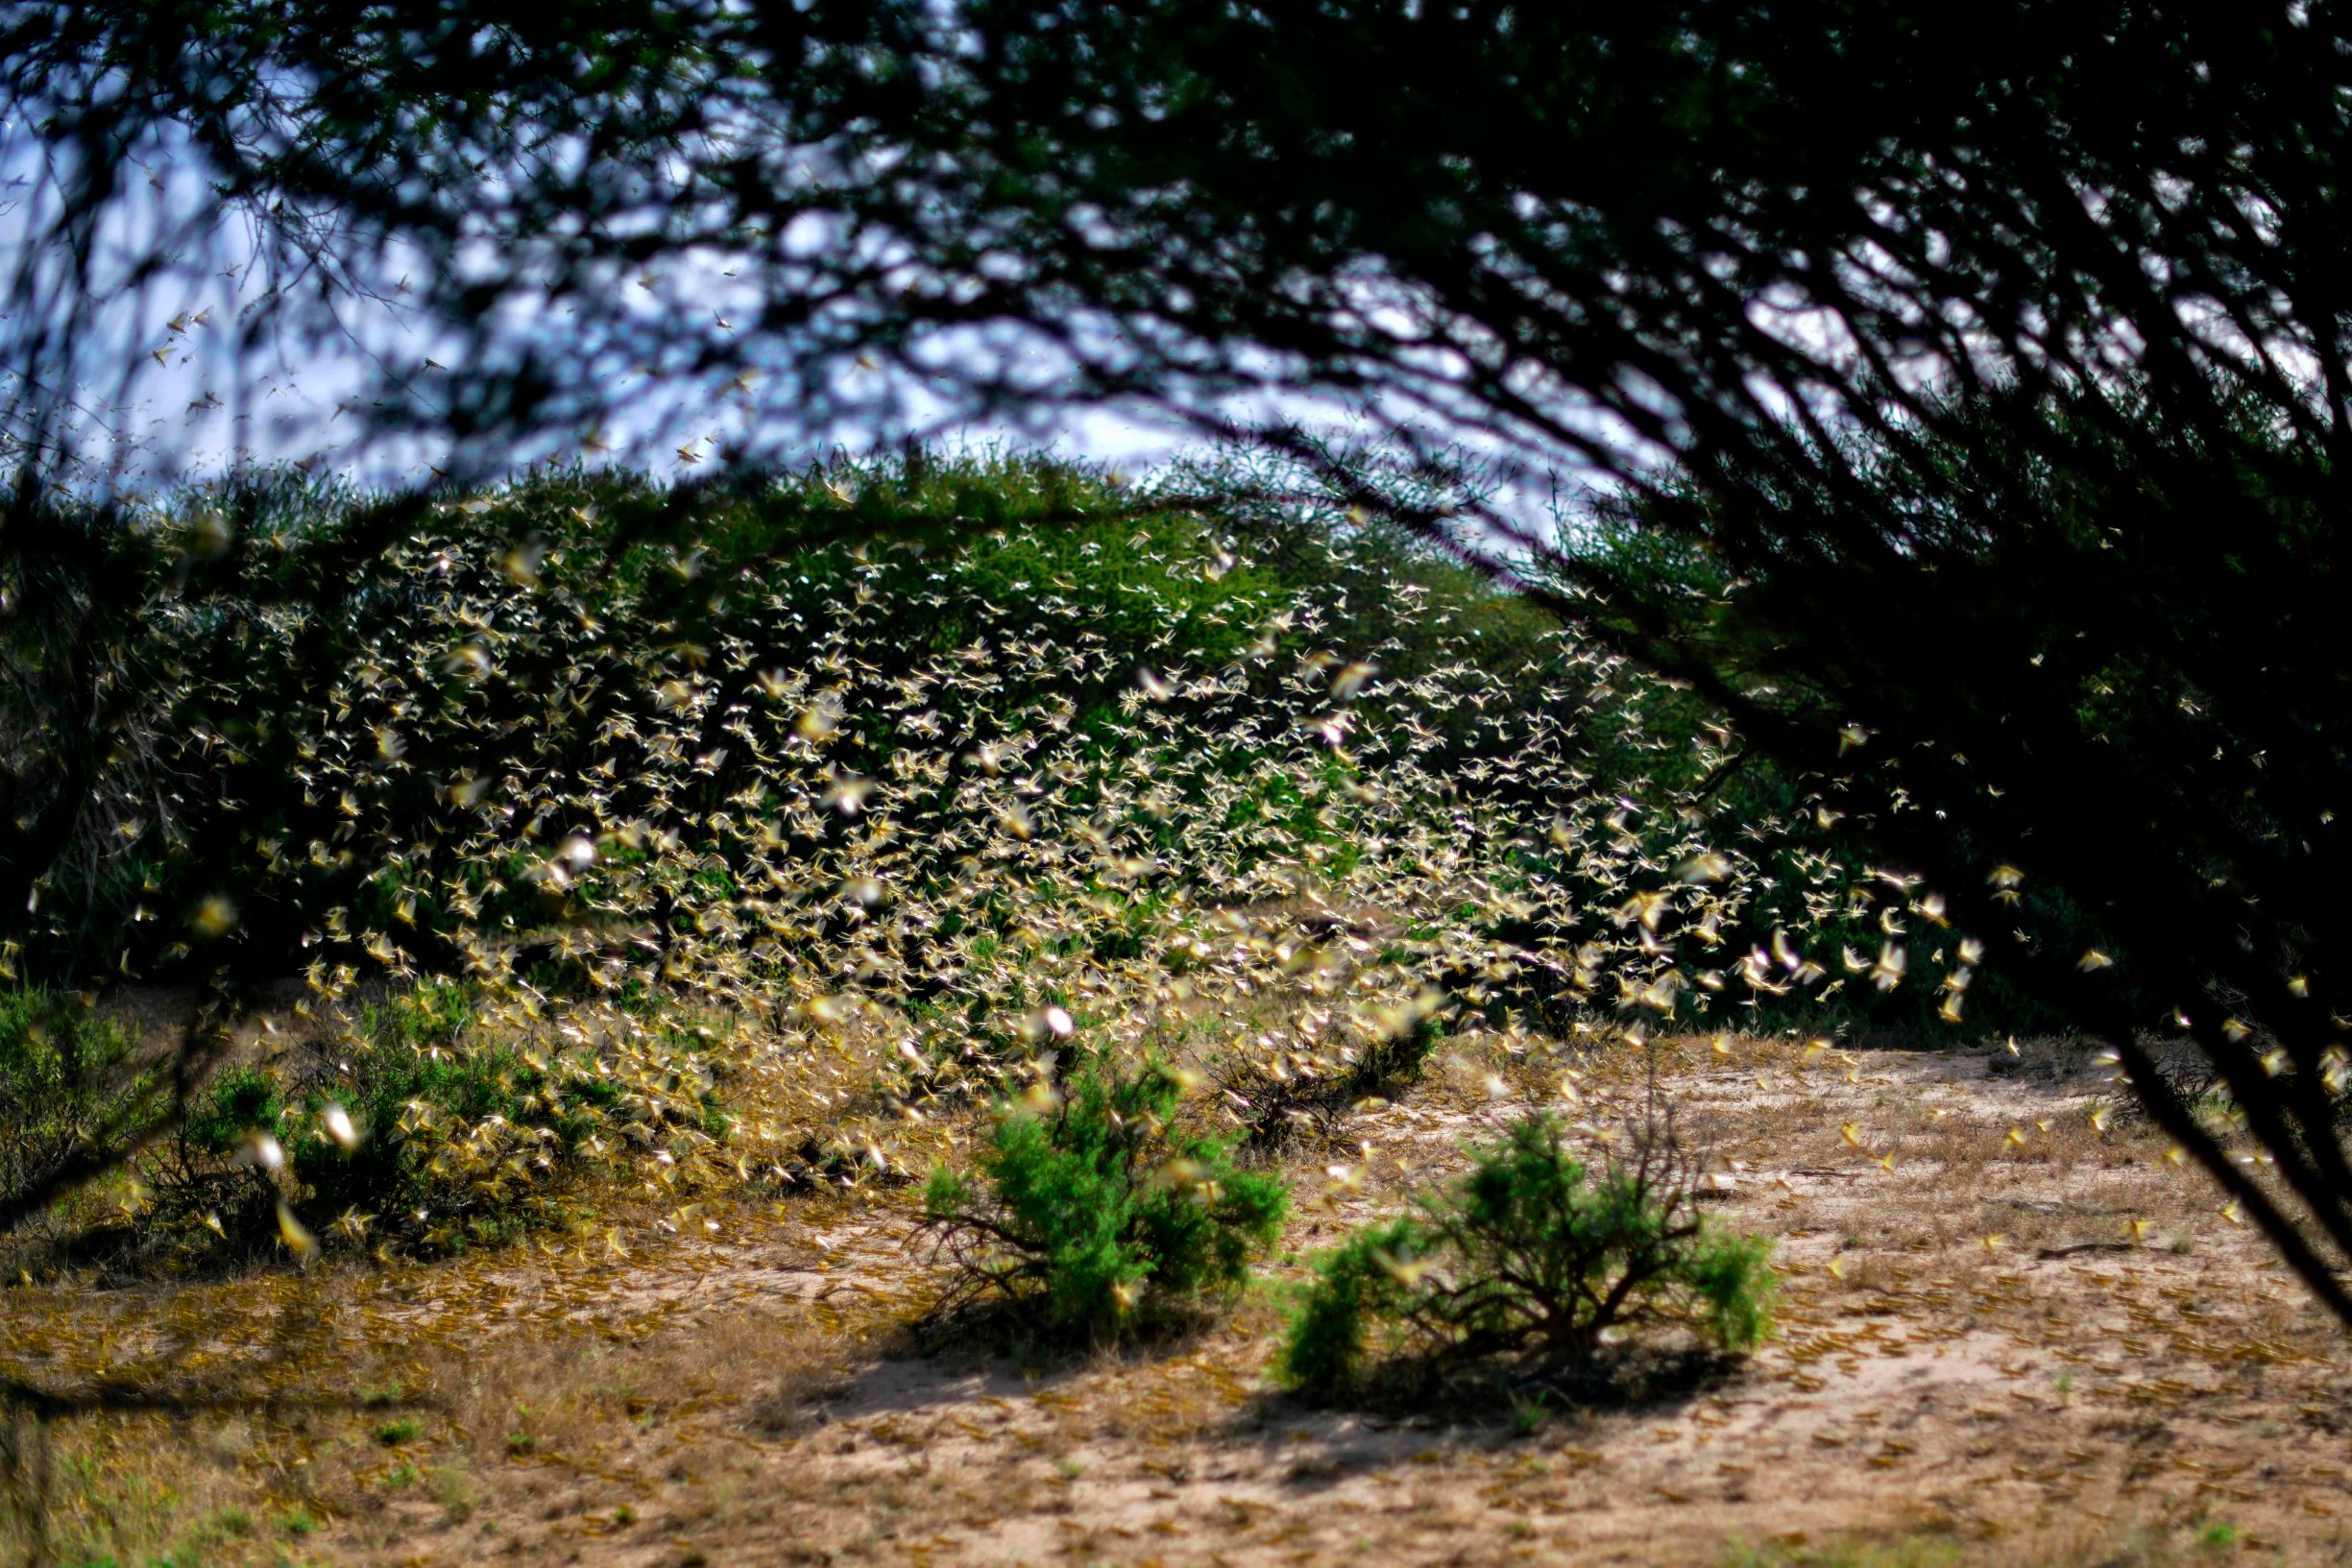 Locusts swarm from ground vegetation at Lerata village ,near Archers Post in Samburu county, approximately 300 kilomters (186 miles) north of kenyan capital, Nairobi on January 22, 2020. - The outbreak of desert locusts, considered the most dangerous locust species, is significant and extremely dangerous warned the United Nations Food and Agriculture Organisation ,Monday,  describing the infestation as an eminent threat to food security in months to come if control measures are not taken. (Photo by TONY KARUMBA / AFP)